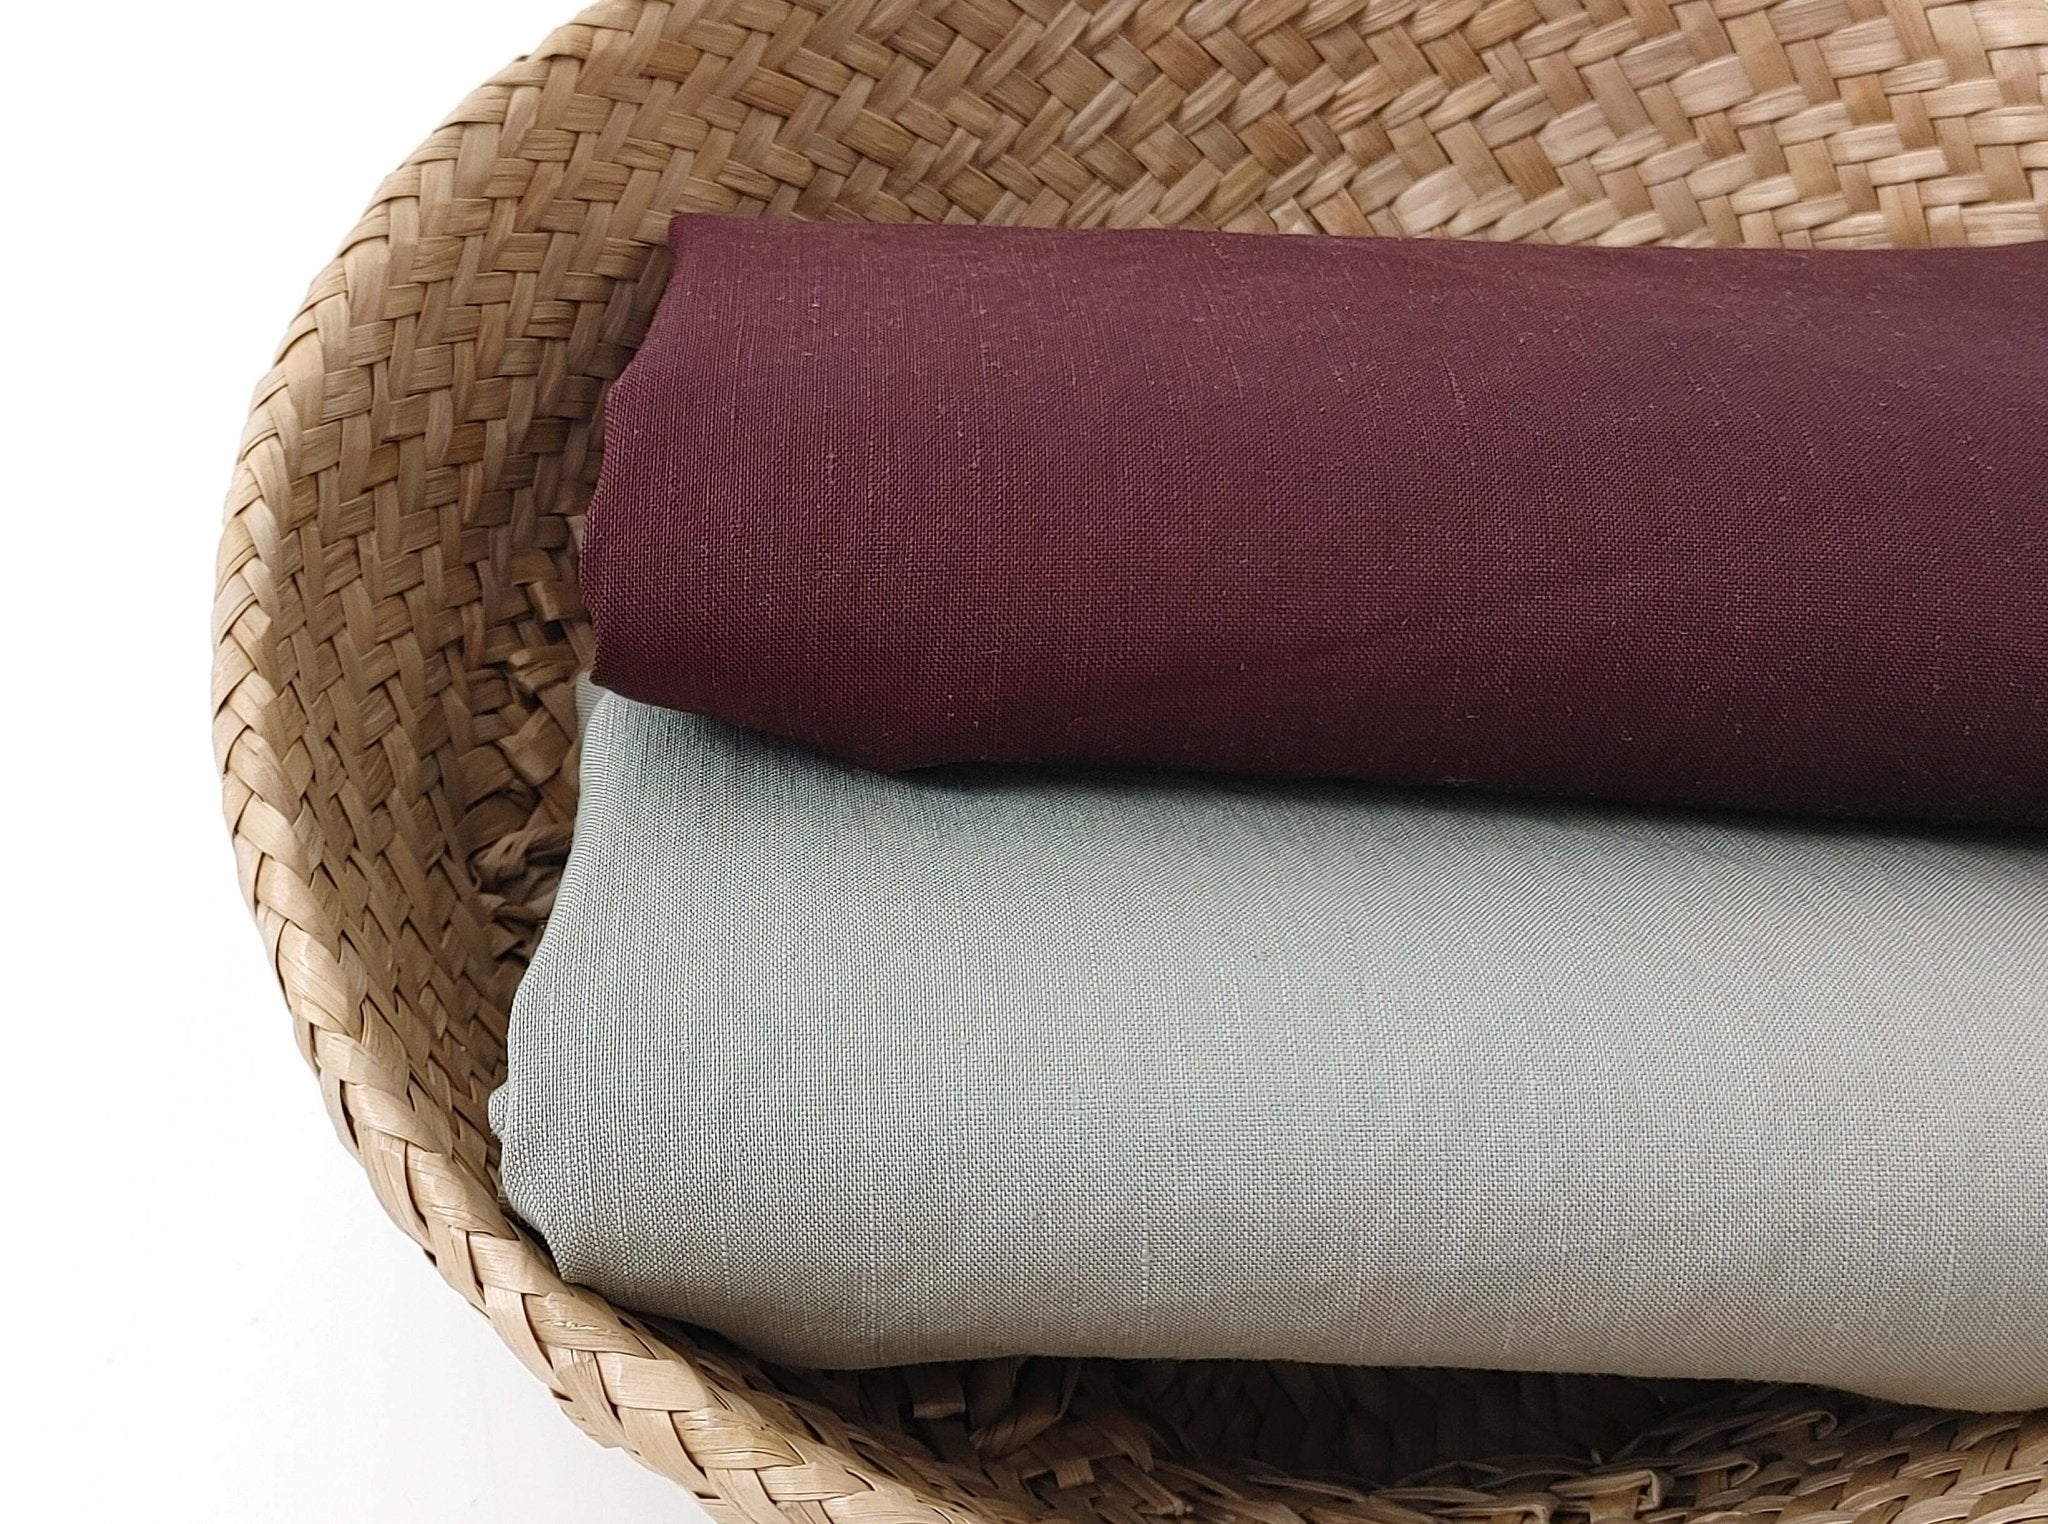 Medium Weight Linen Rayon Stretch Fabric - Versatile Material for Crafting and Apparel 6888 6889 - The Linen Lab - Brown